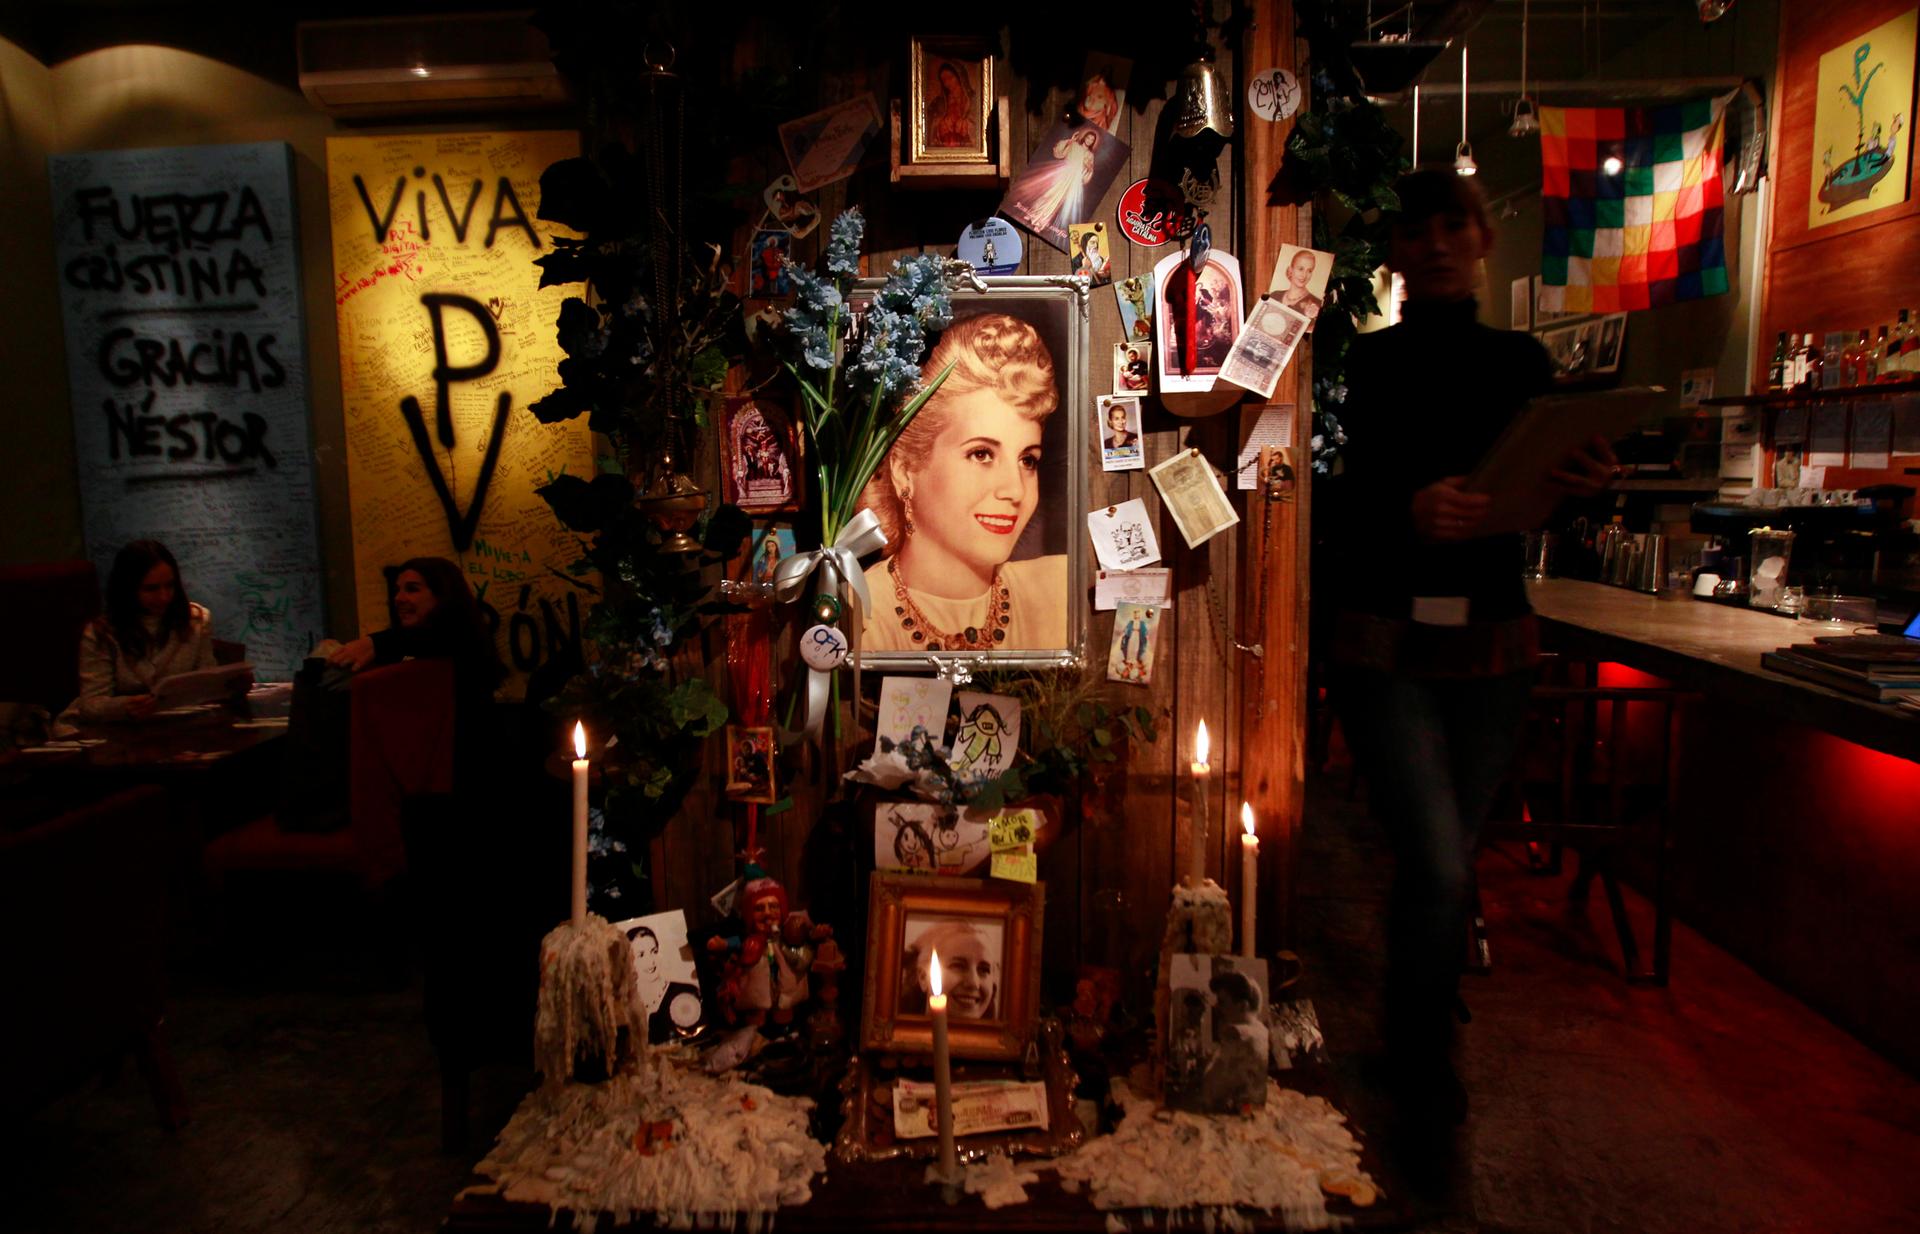 A shrine for Eva Peron, wife of former Argentine President Juan Peron, is seen at the Peron, Peron restaurant in Buenos Aires, May 19, 2011.